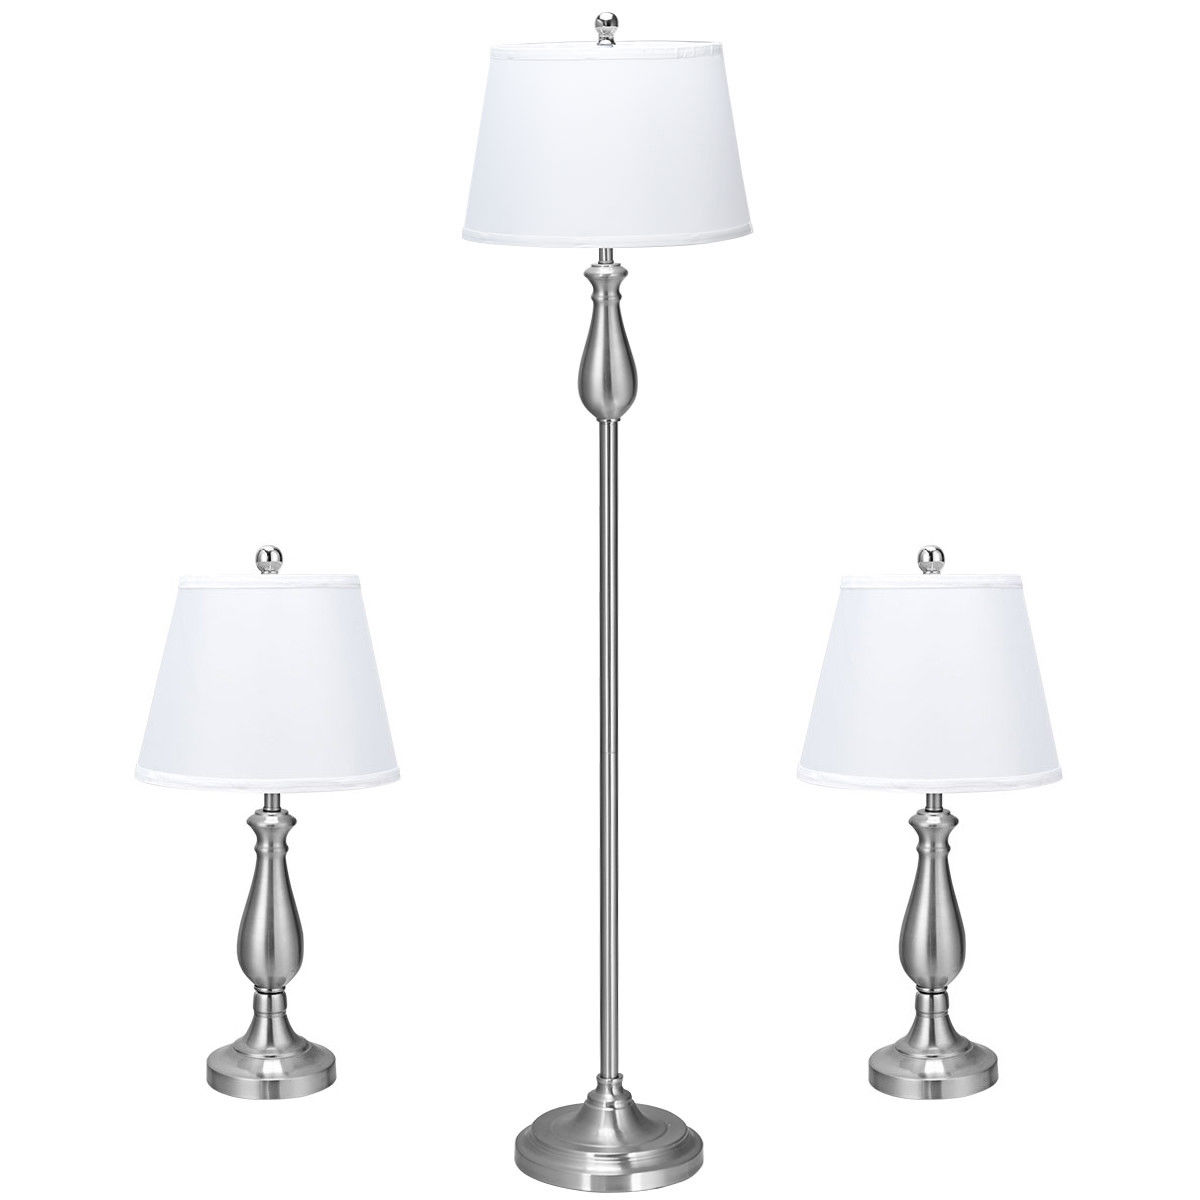 Gymax 3 Piece Lamp Set 2 Table Lamps 1, Brushed Nickel Table Lamps Set Of 2